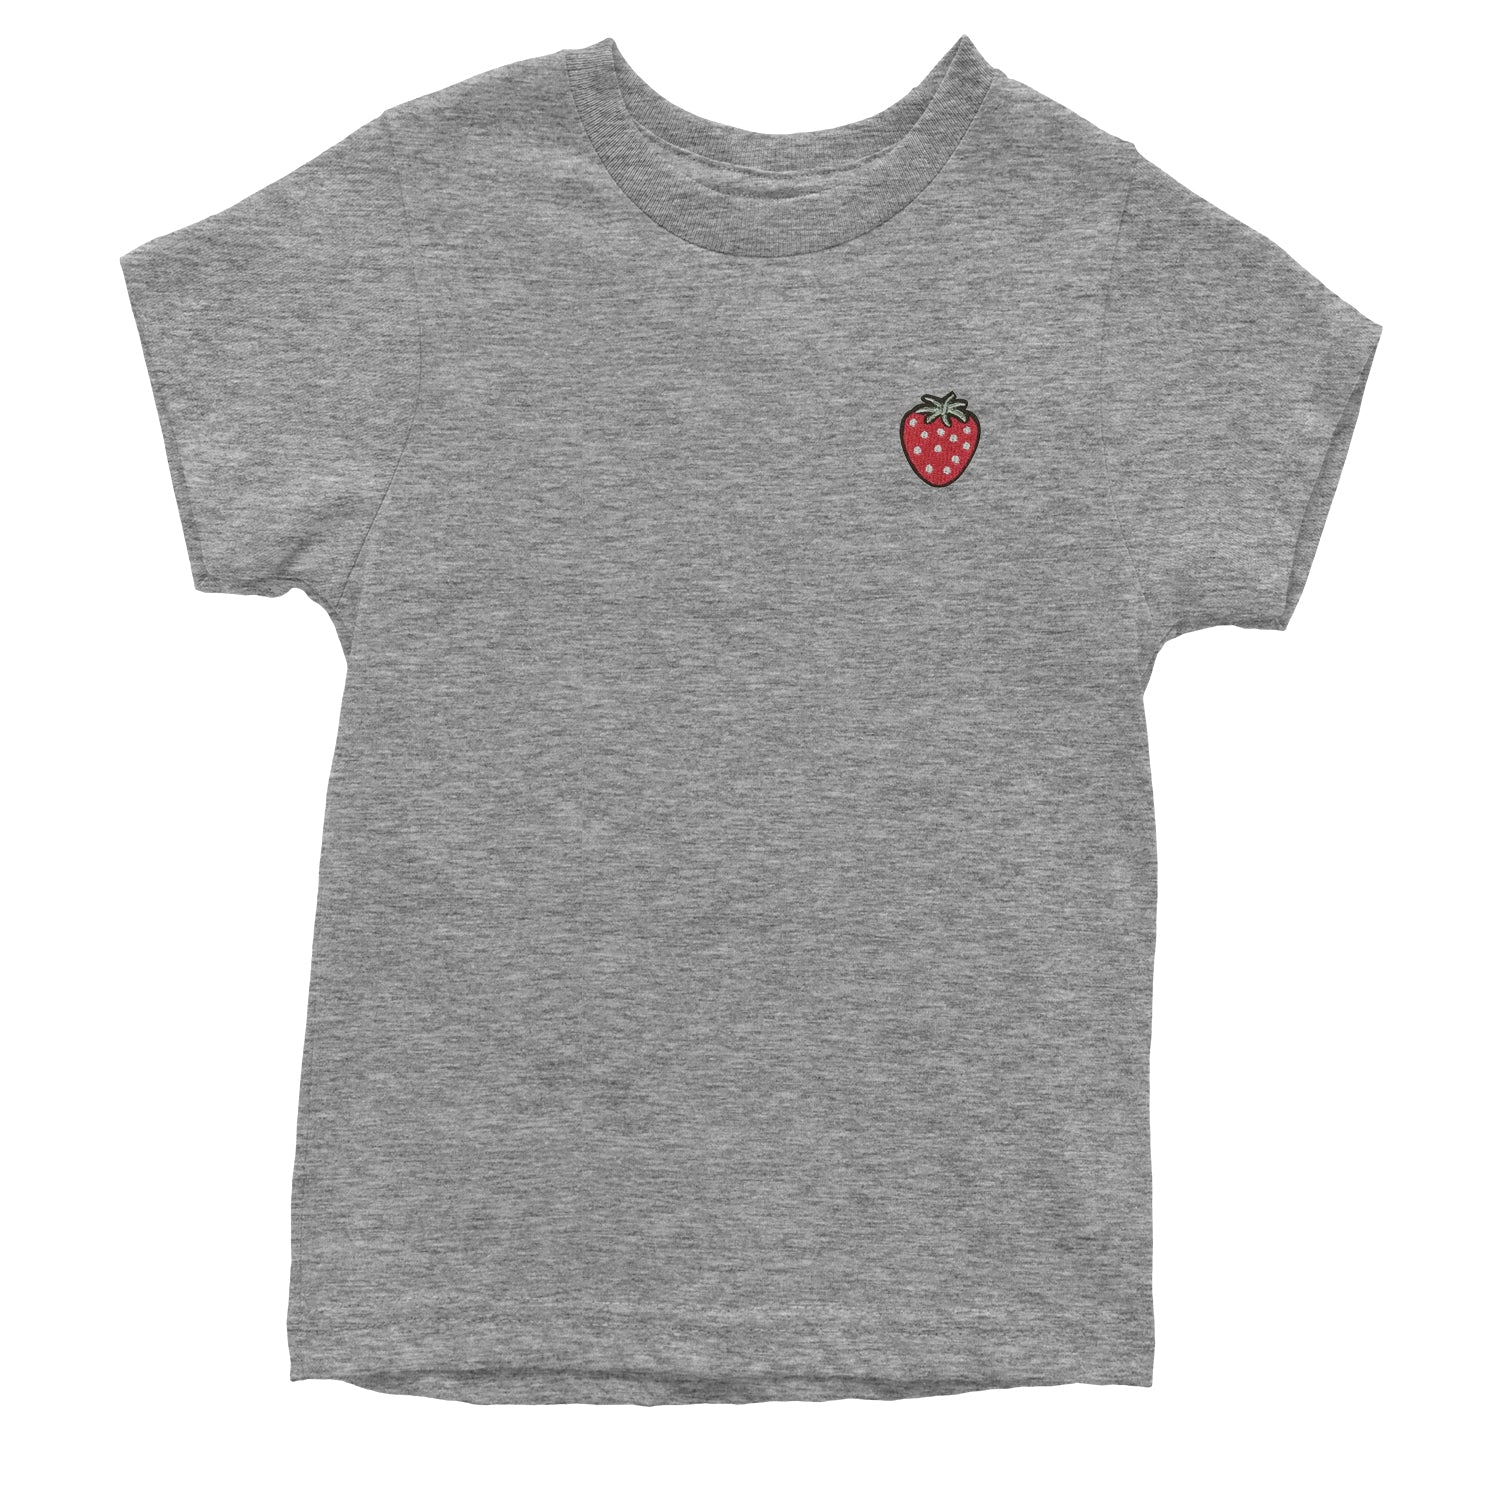 Embroidered Strawberry Patch (Pocket Print) Youth T-shirt fruit, strawberries by Expression Tees